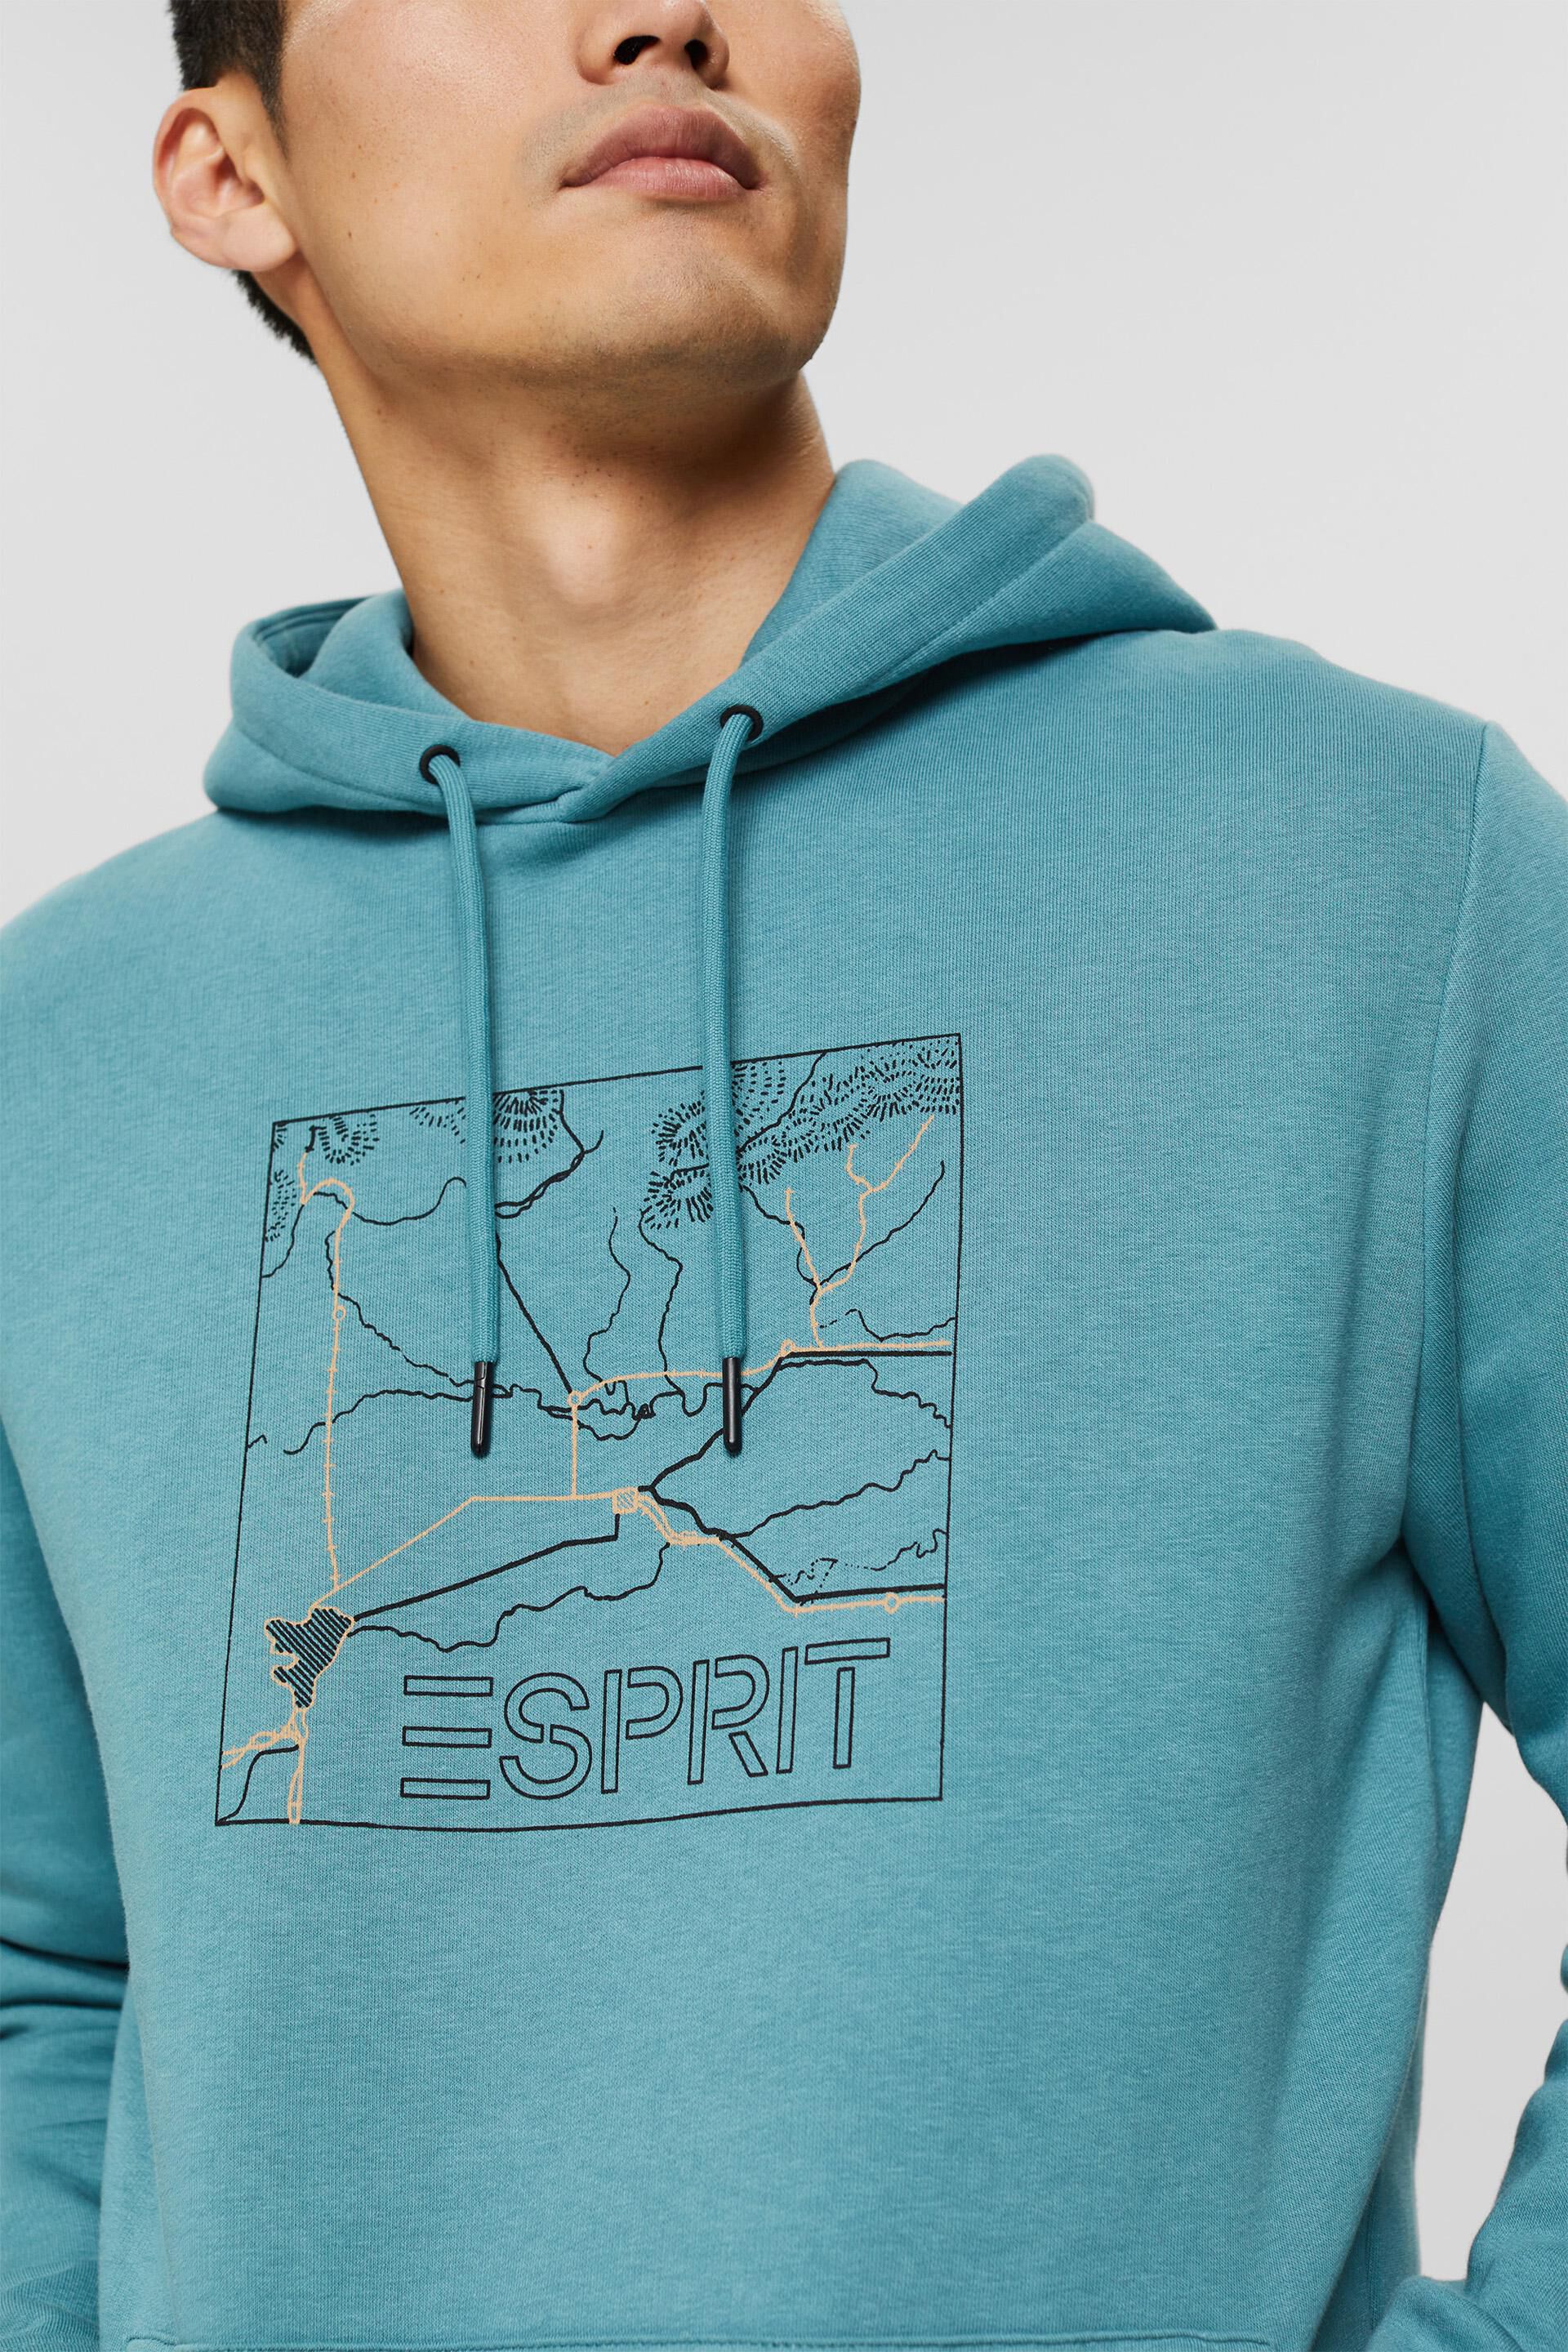 Esprit of recycled Made material: print hoodie sweatshirt with